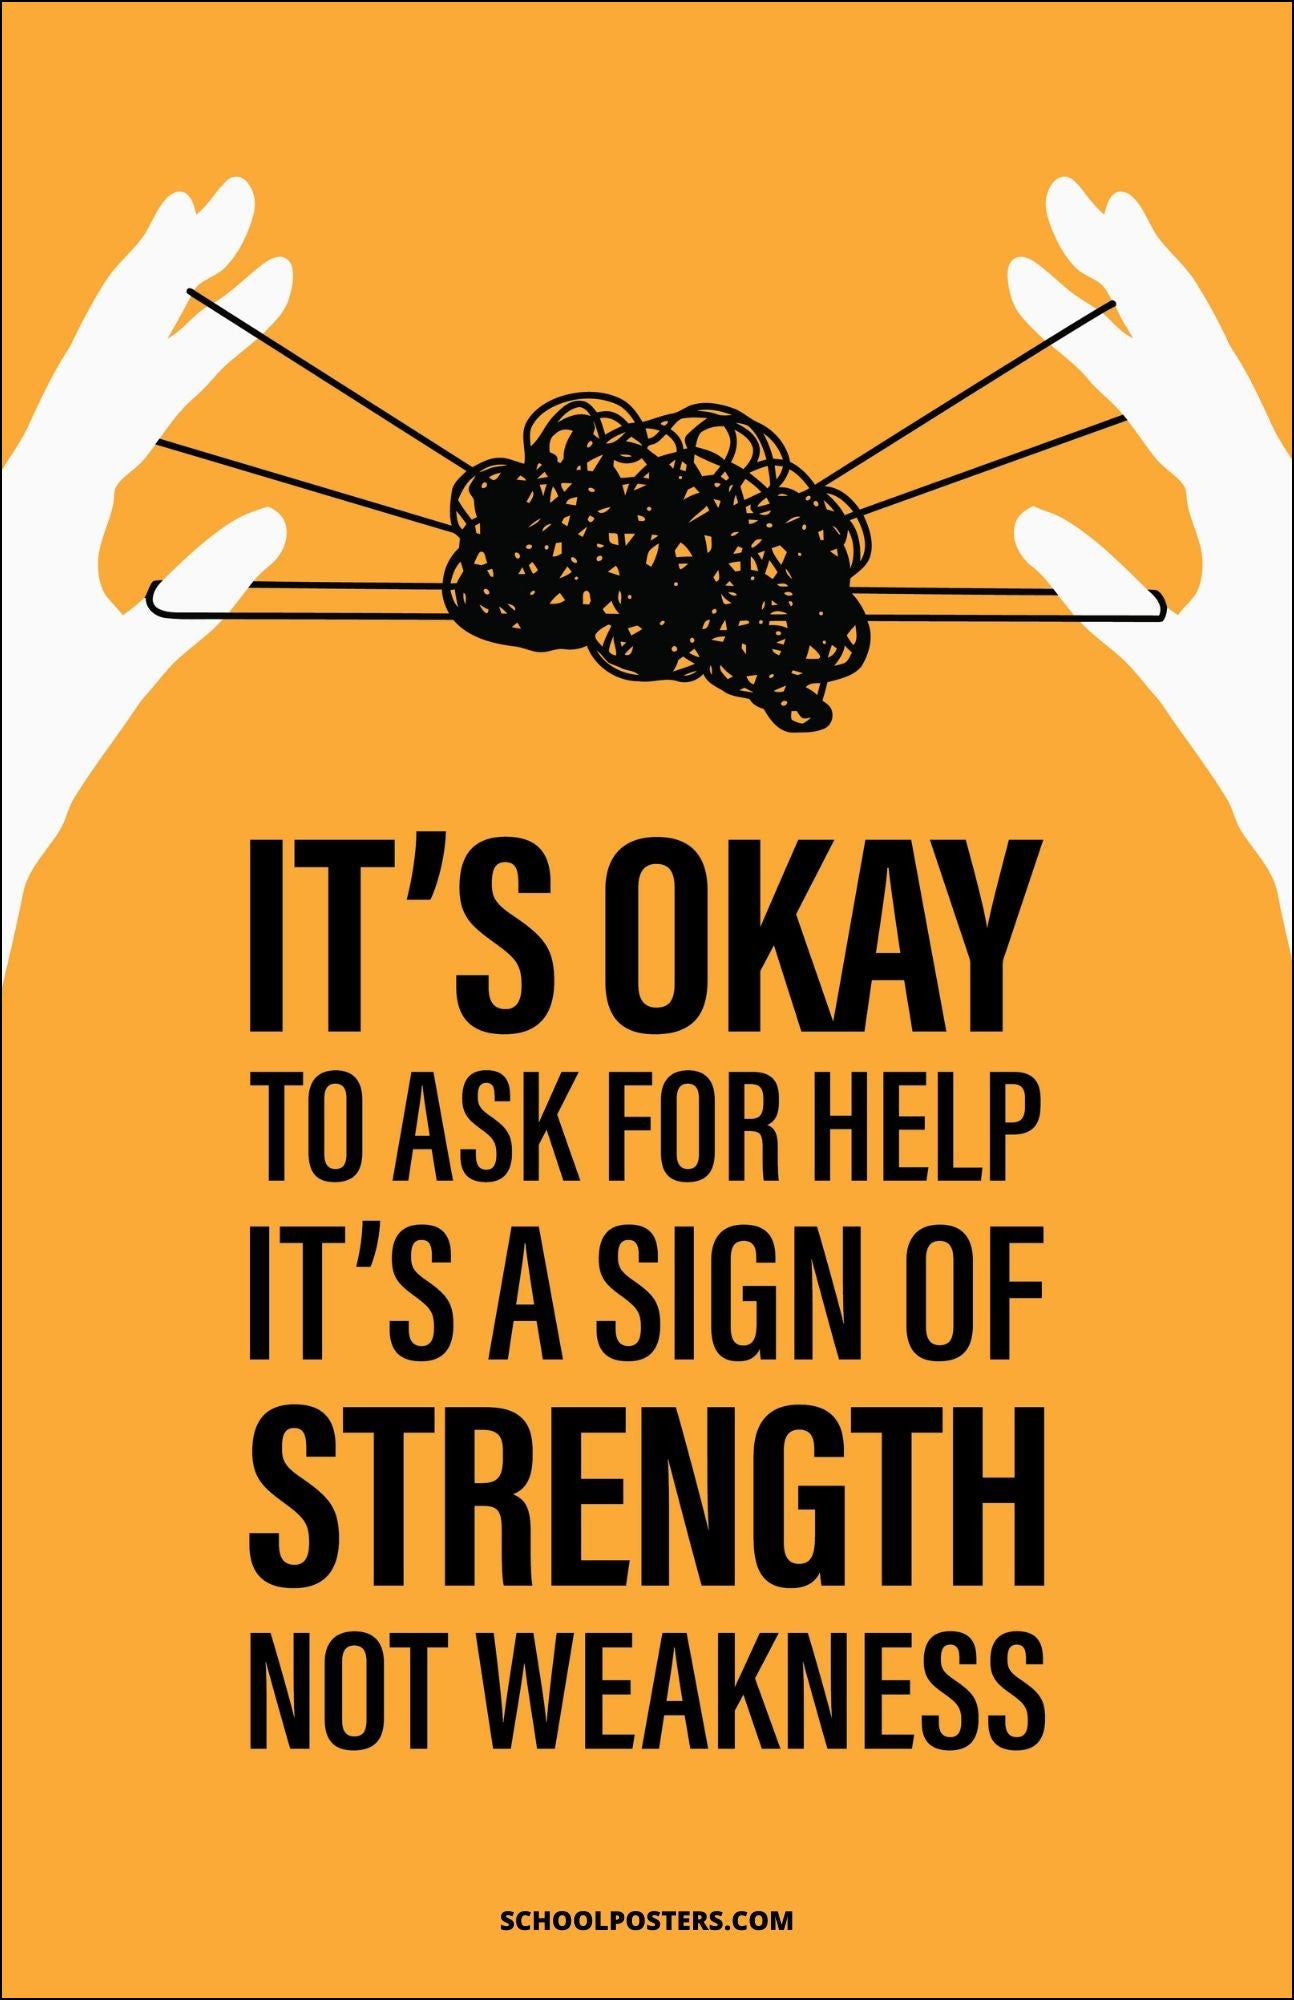 It's Okay To Ask For Help Poster